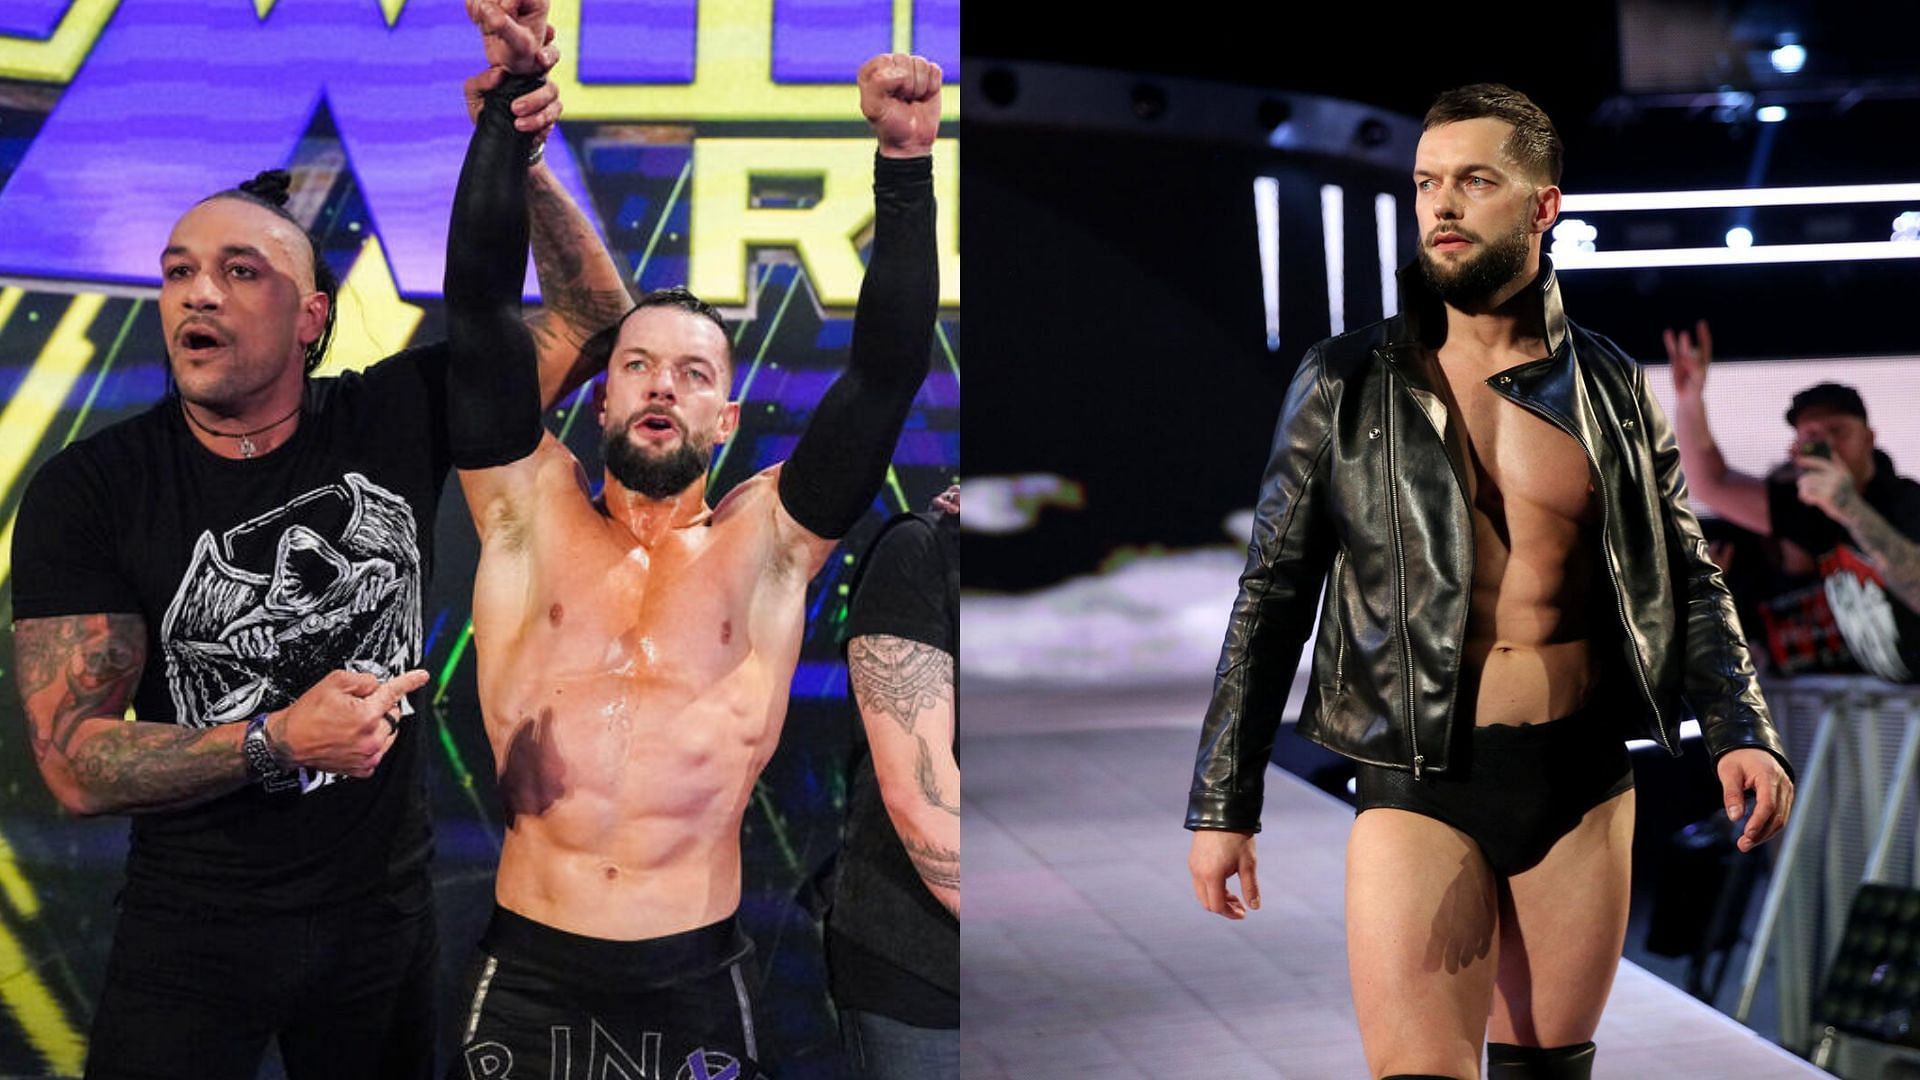 Finn Balor is a member of The Judgment Day